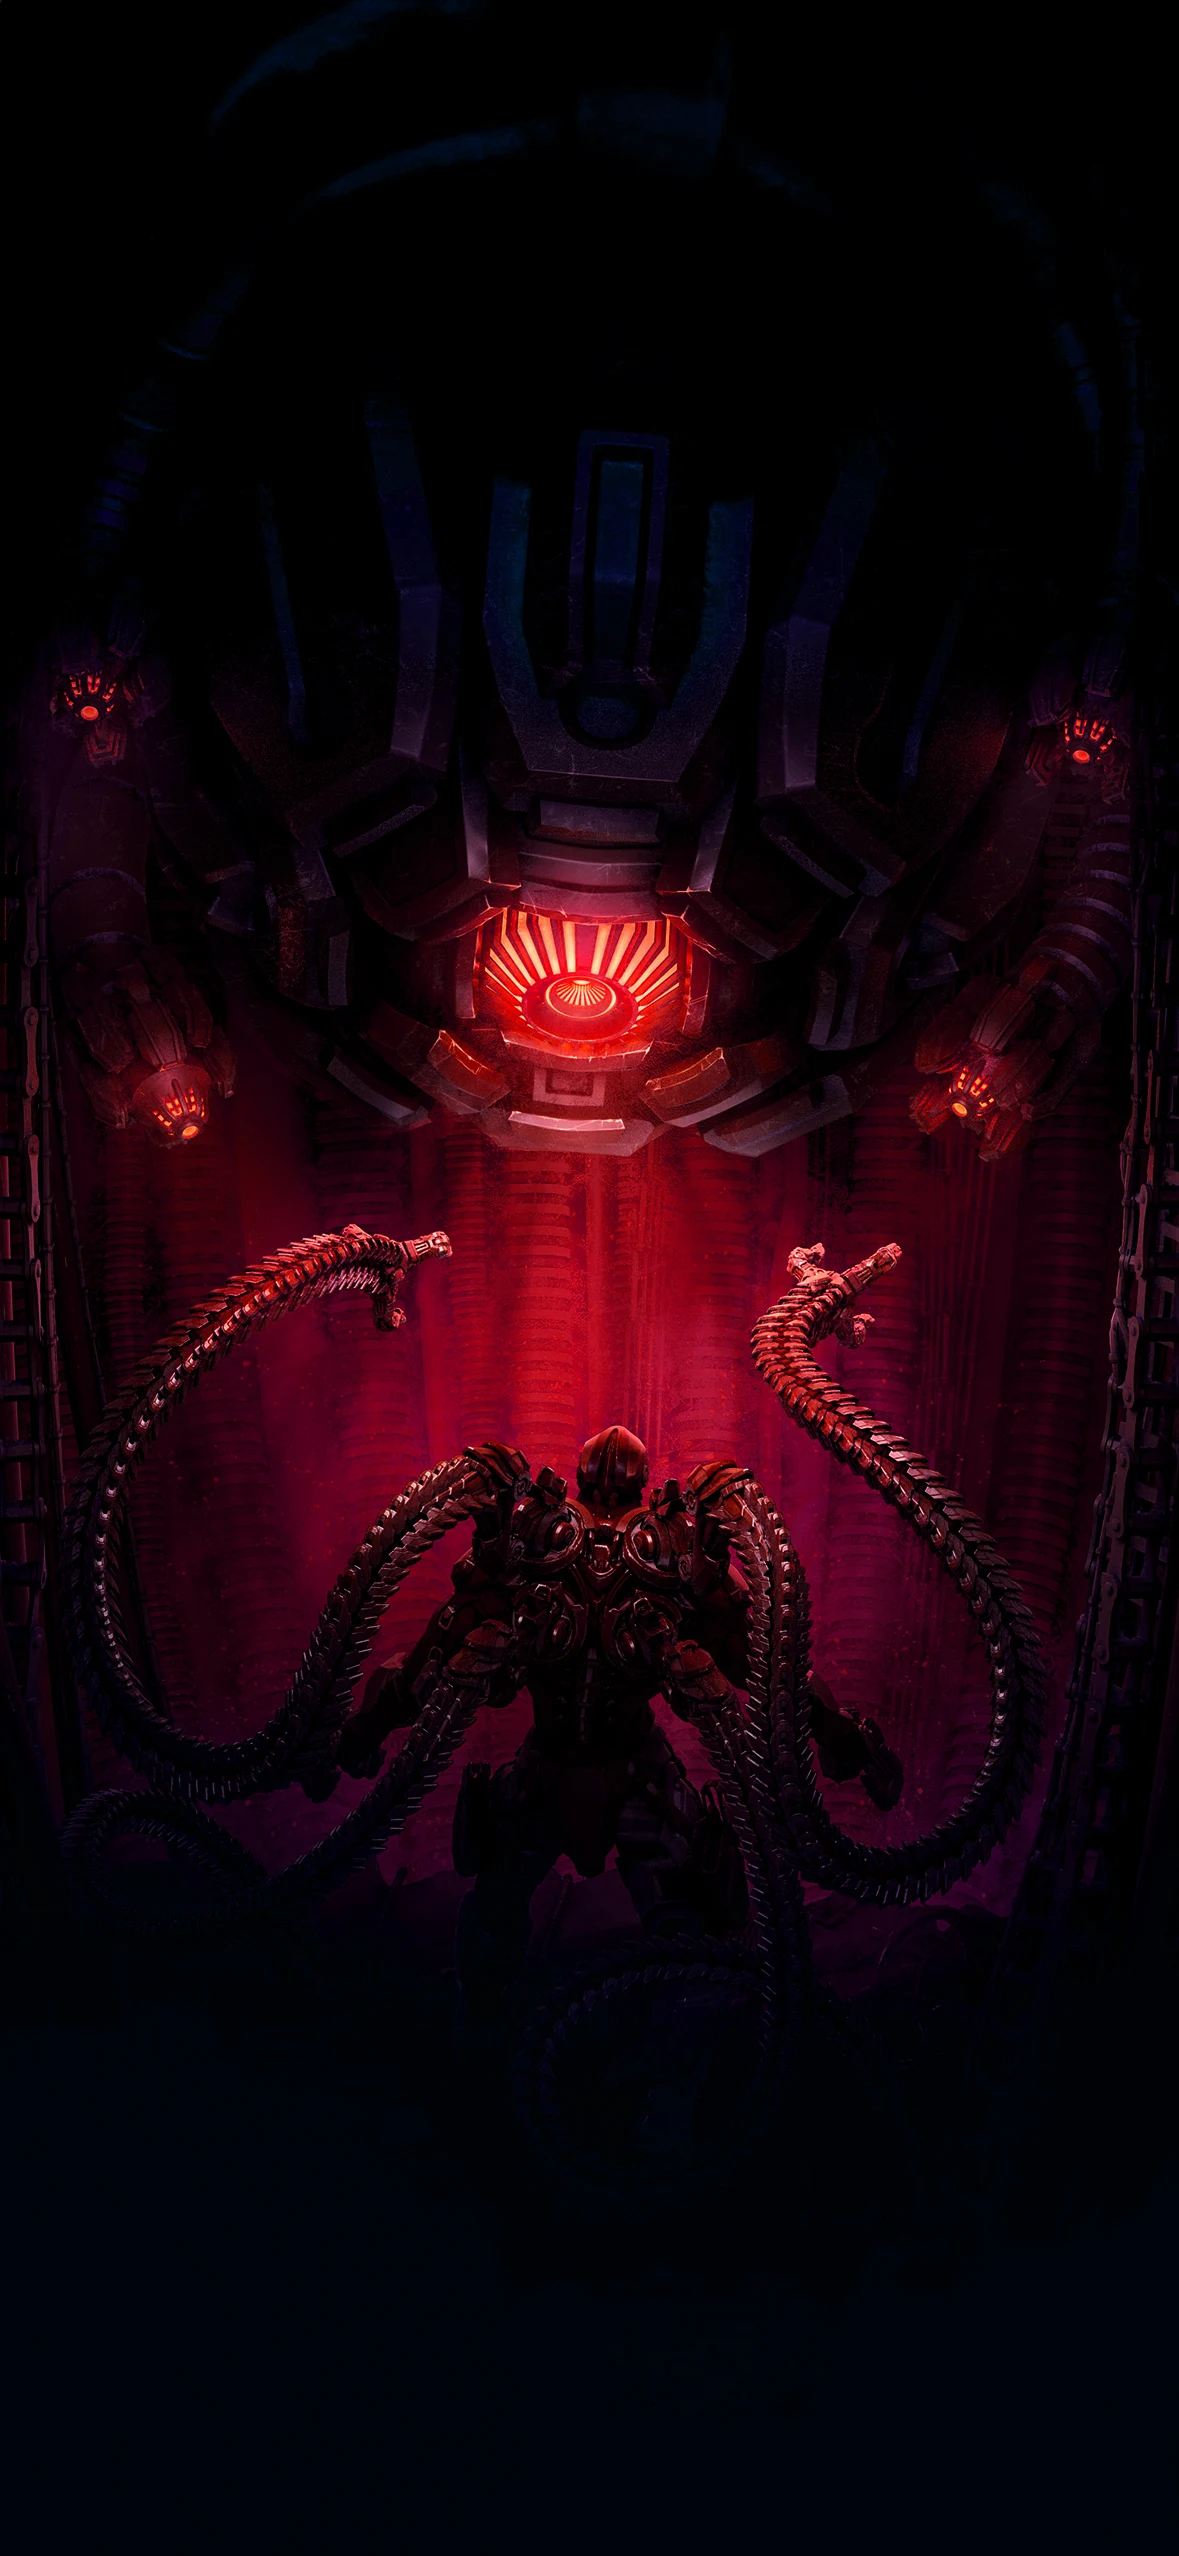 Epic iPhone wallpaper featuring a dark science fiction scene with a robotic overlord and ominous red lighting.